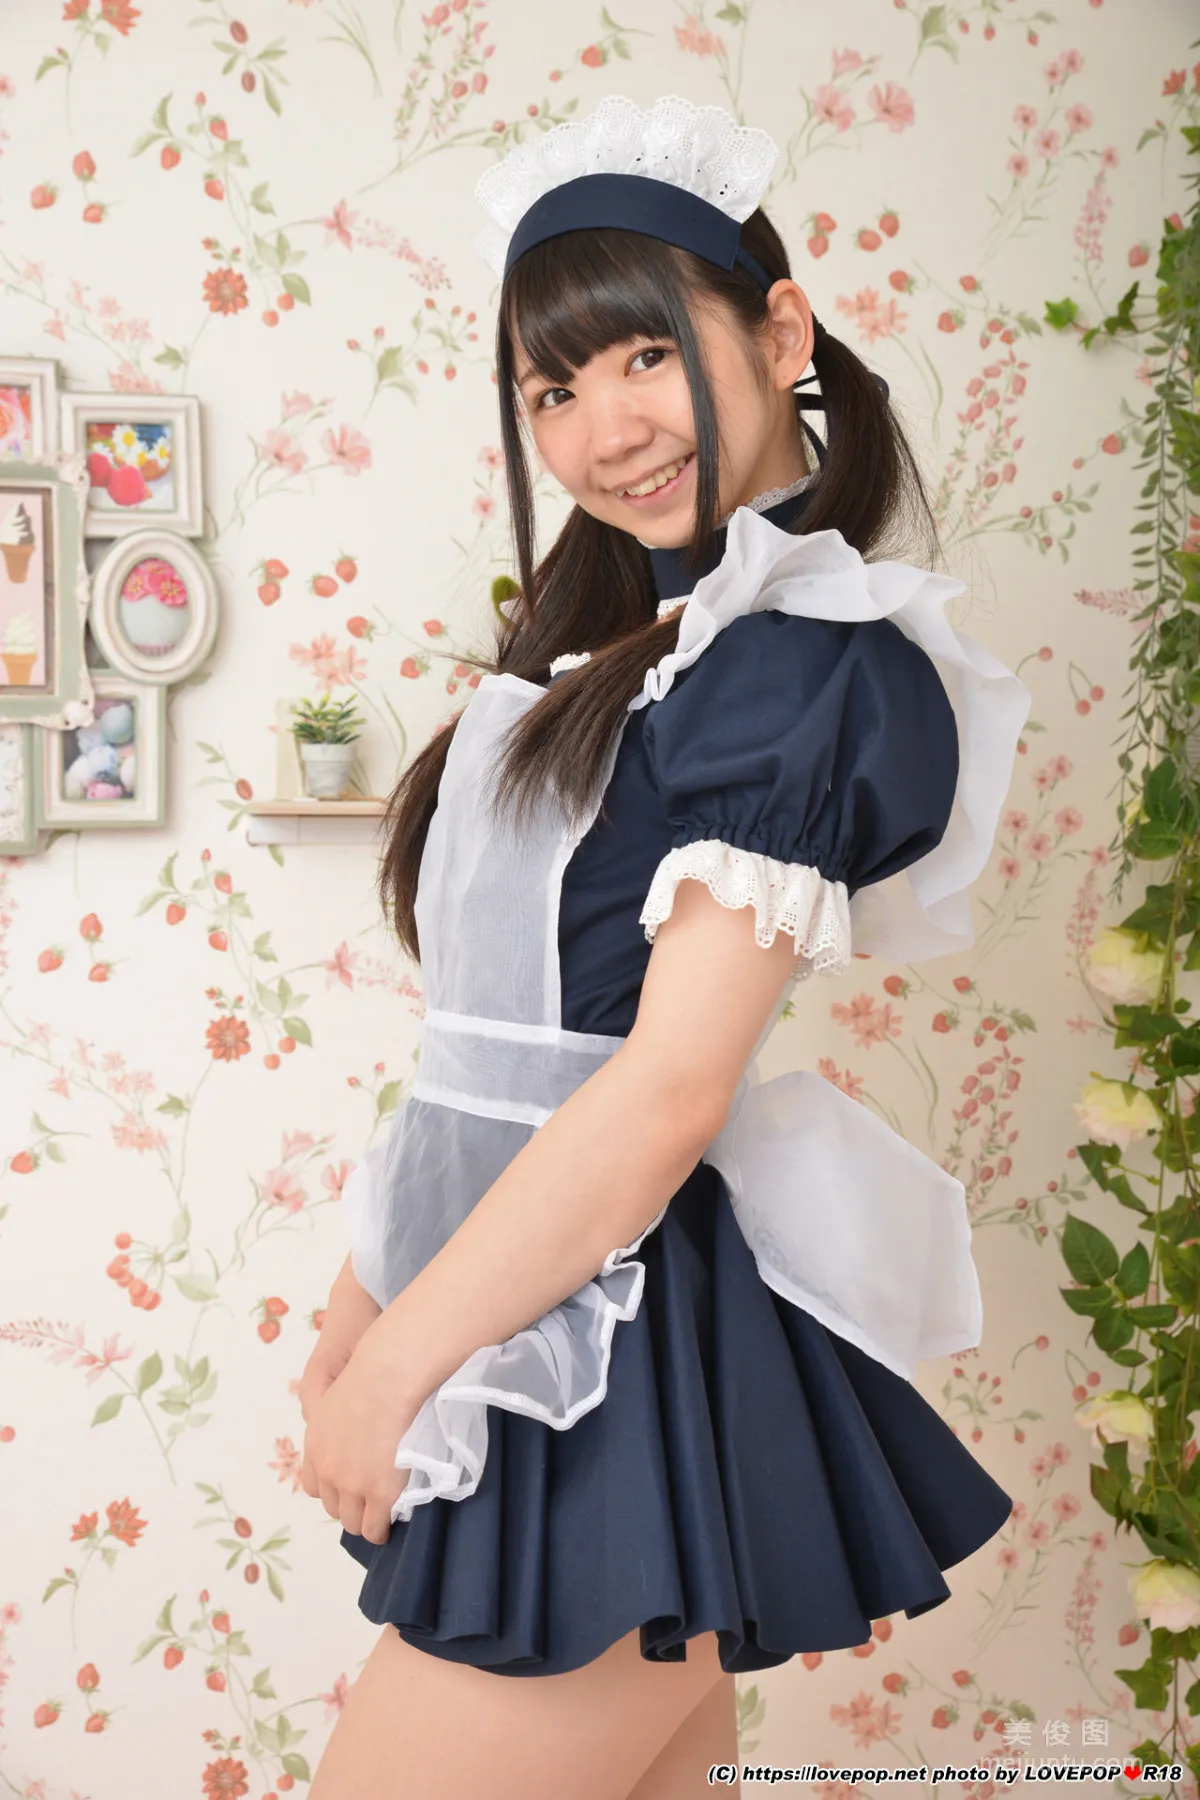 [LOVEPOP] Special Maid Collection - 白井ゆずか Photoset 019